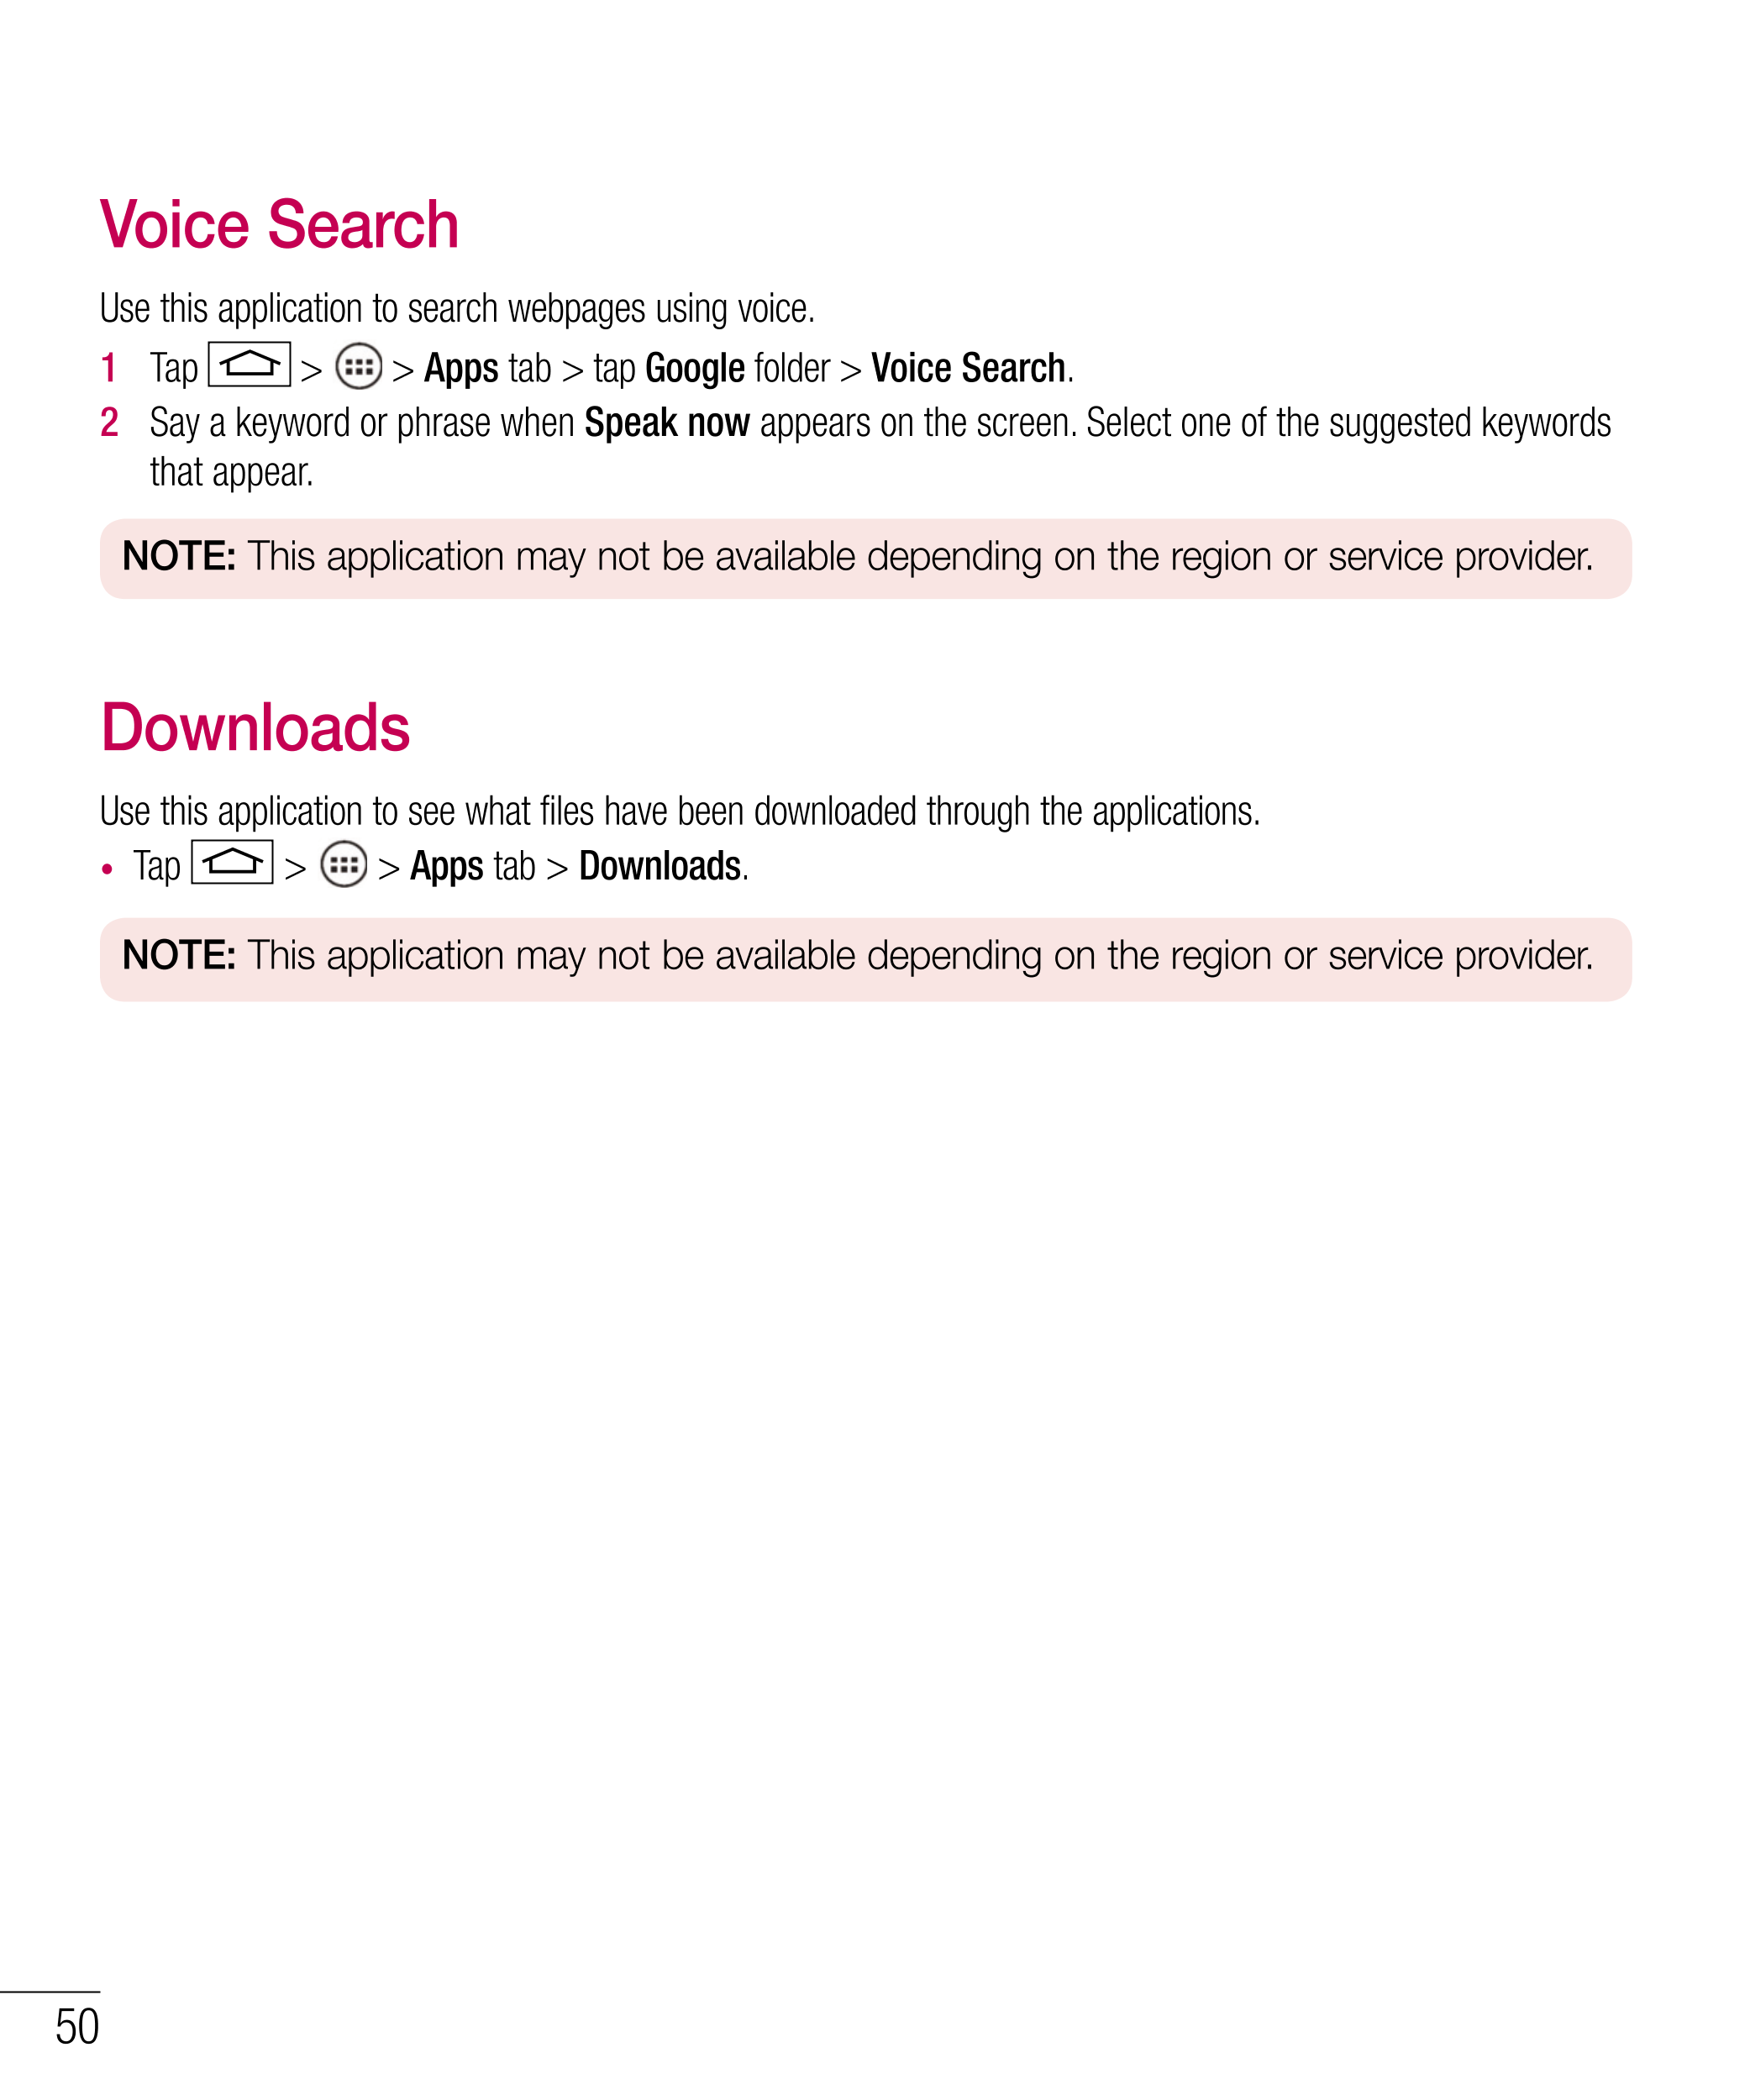 Voice Search
Use this application to search webpages using voice.
1   Tap   >   >  Apps tab > tap  Google  folder  >  Voice Sear